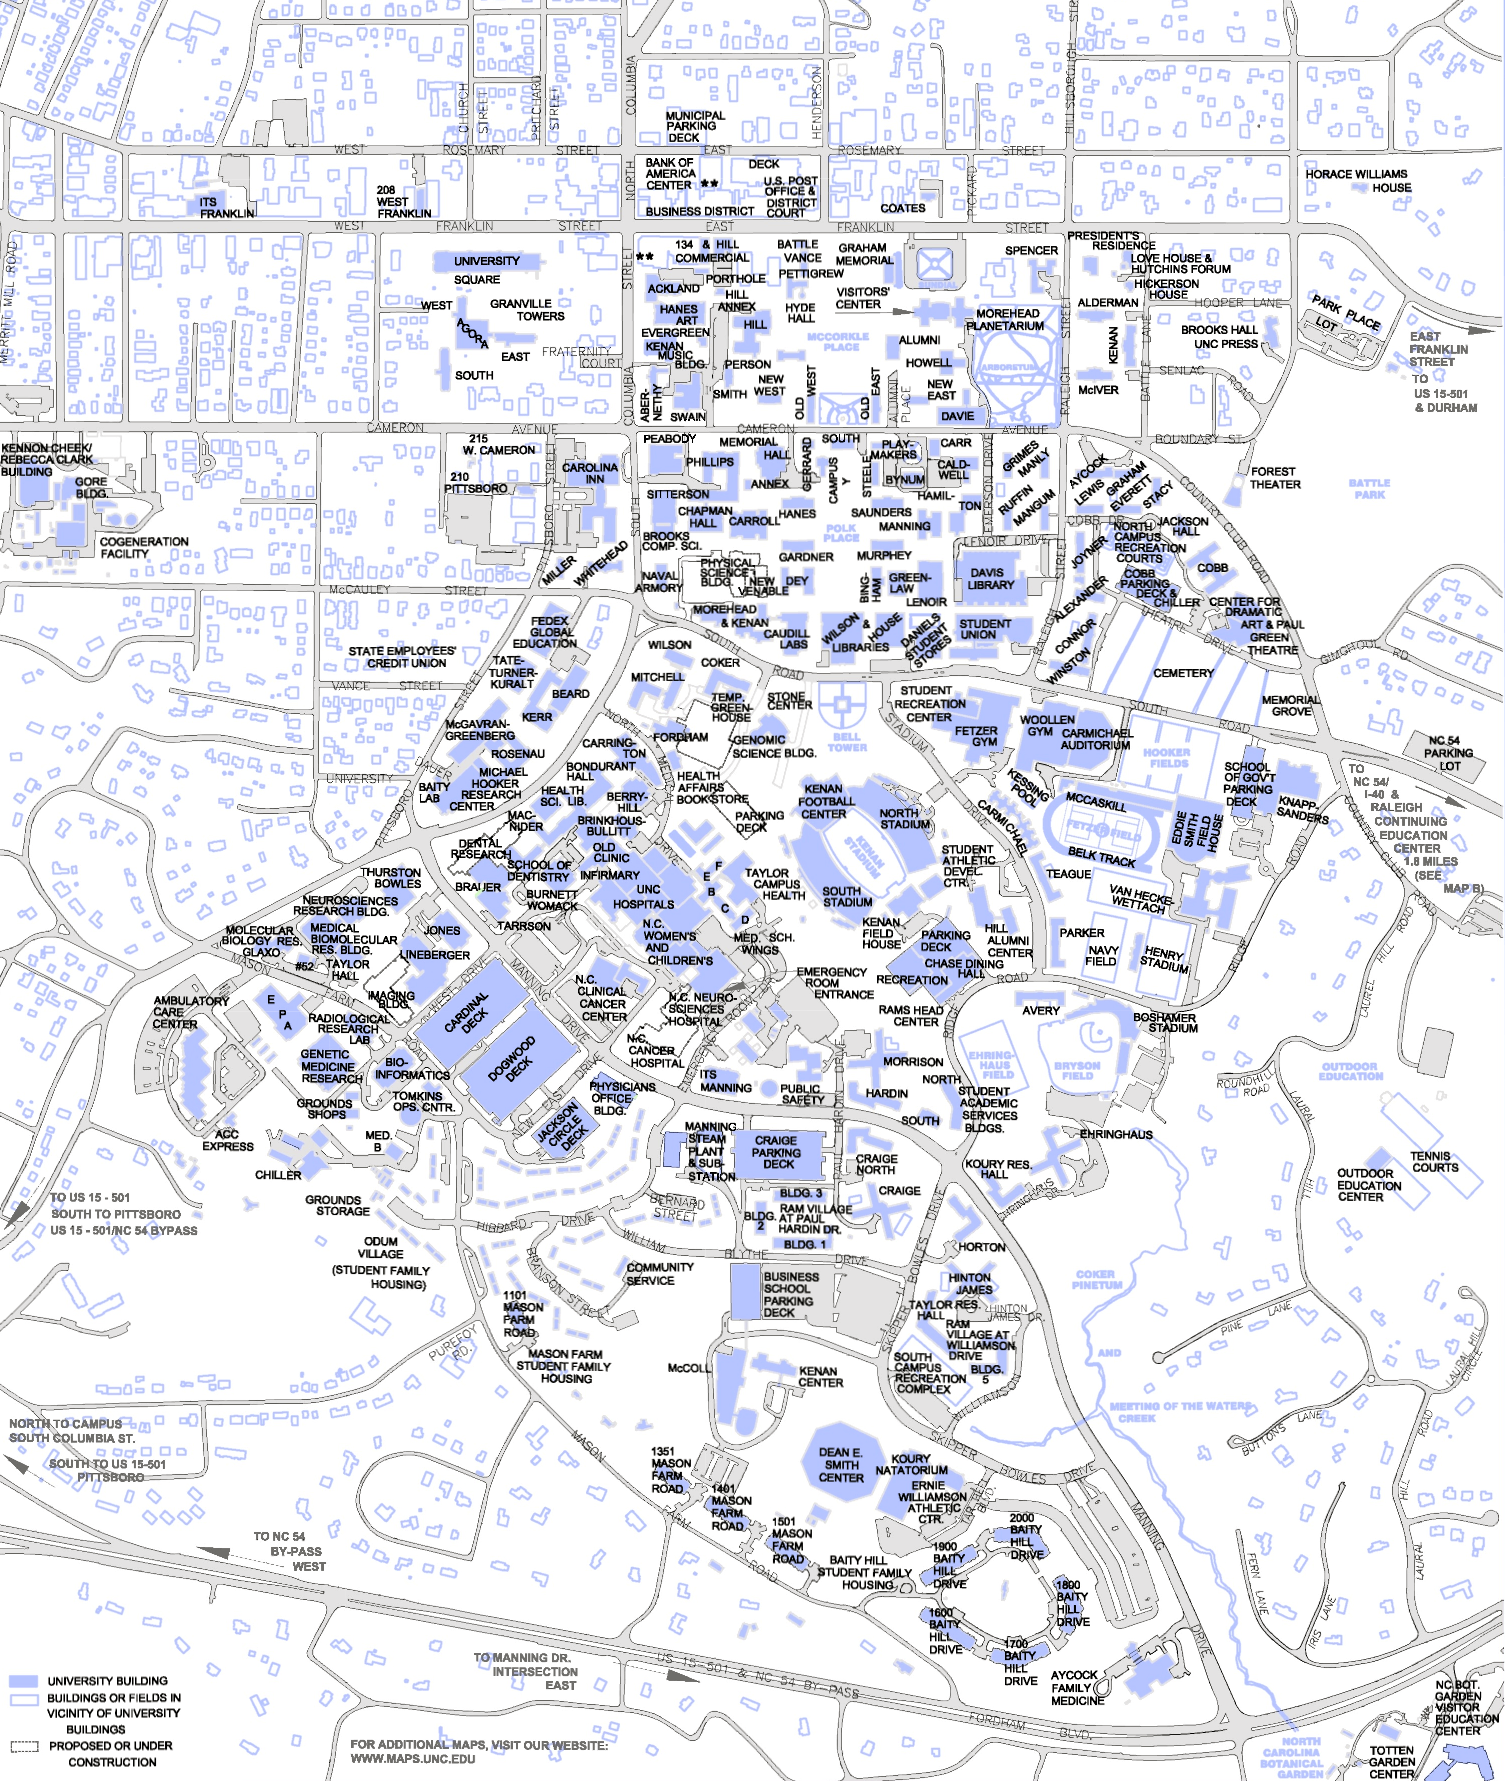 Unc Ch Campus Map Chapel Hill Nc Mappery